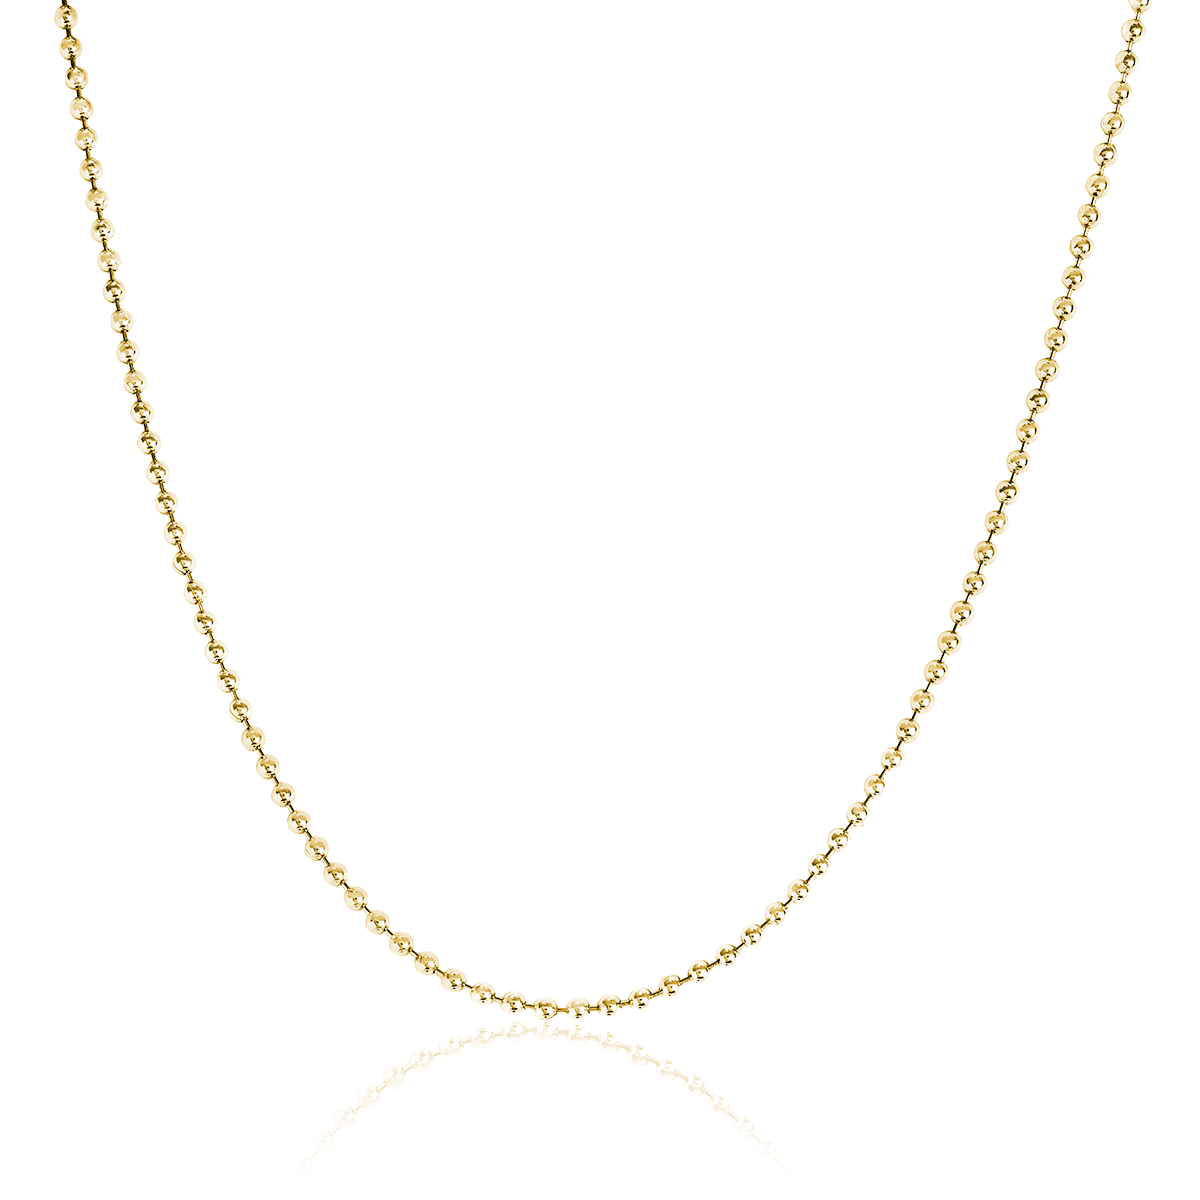 NEW! Men's Ball Chain Necklace